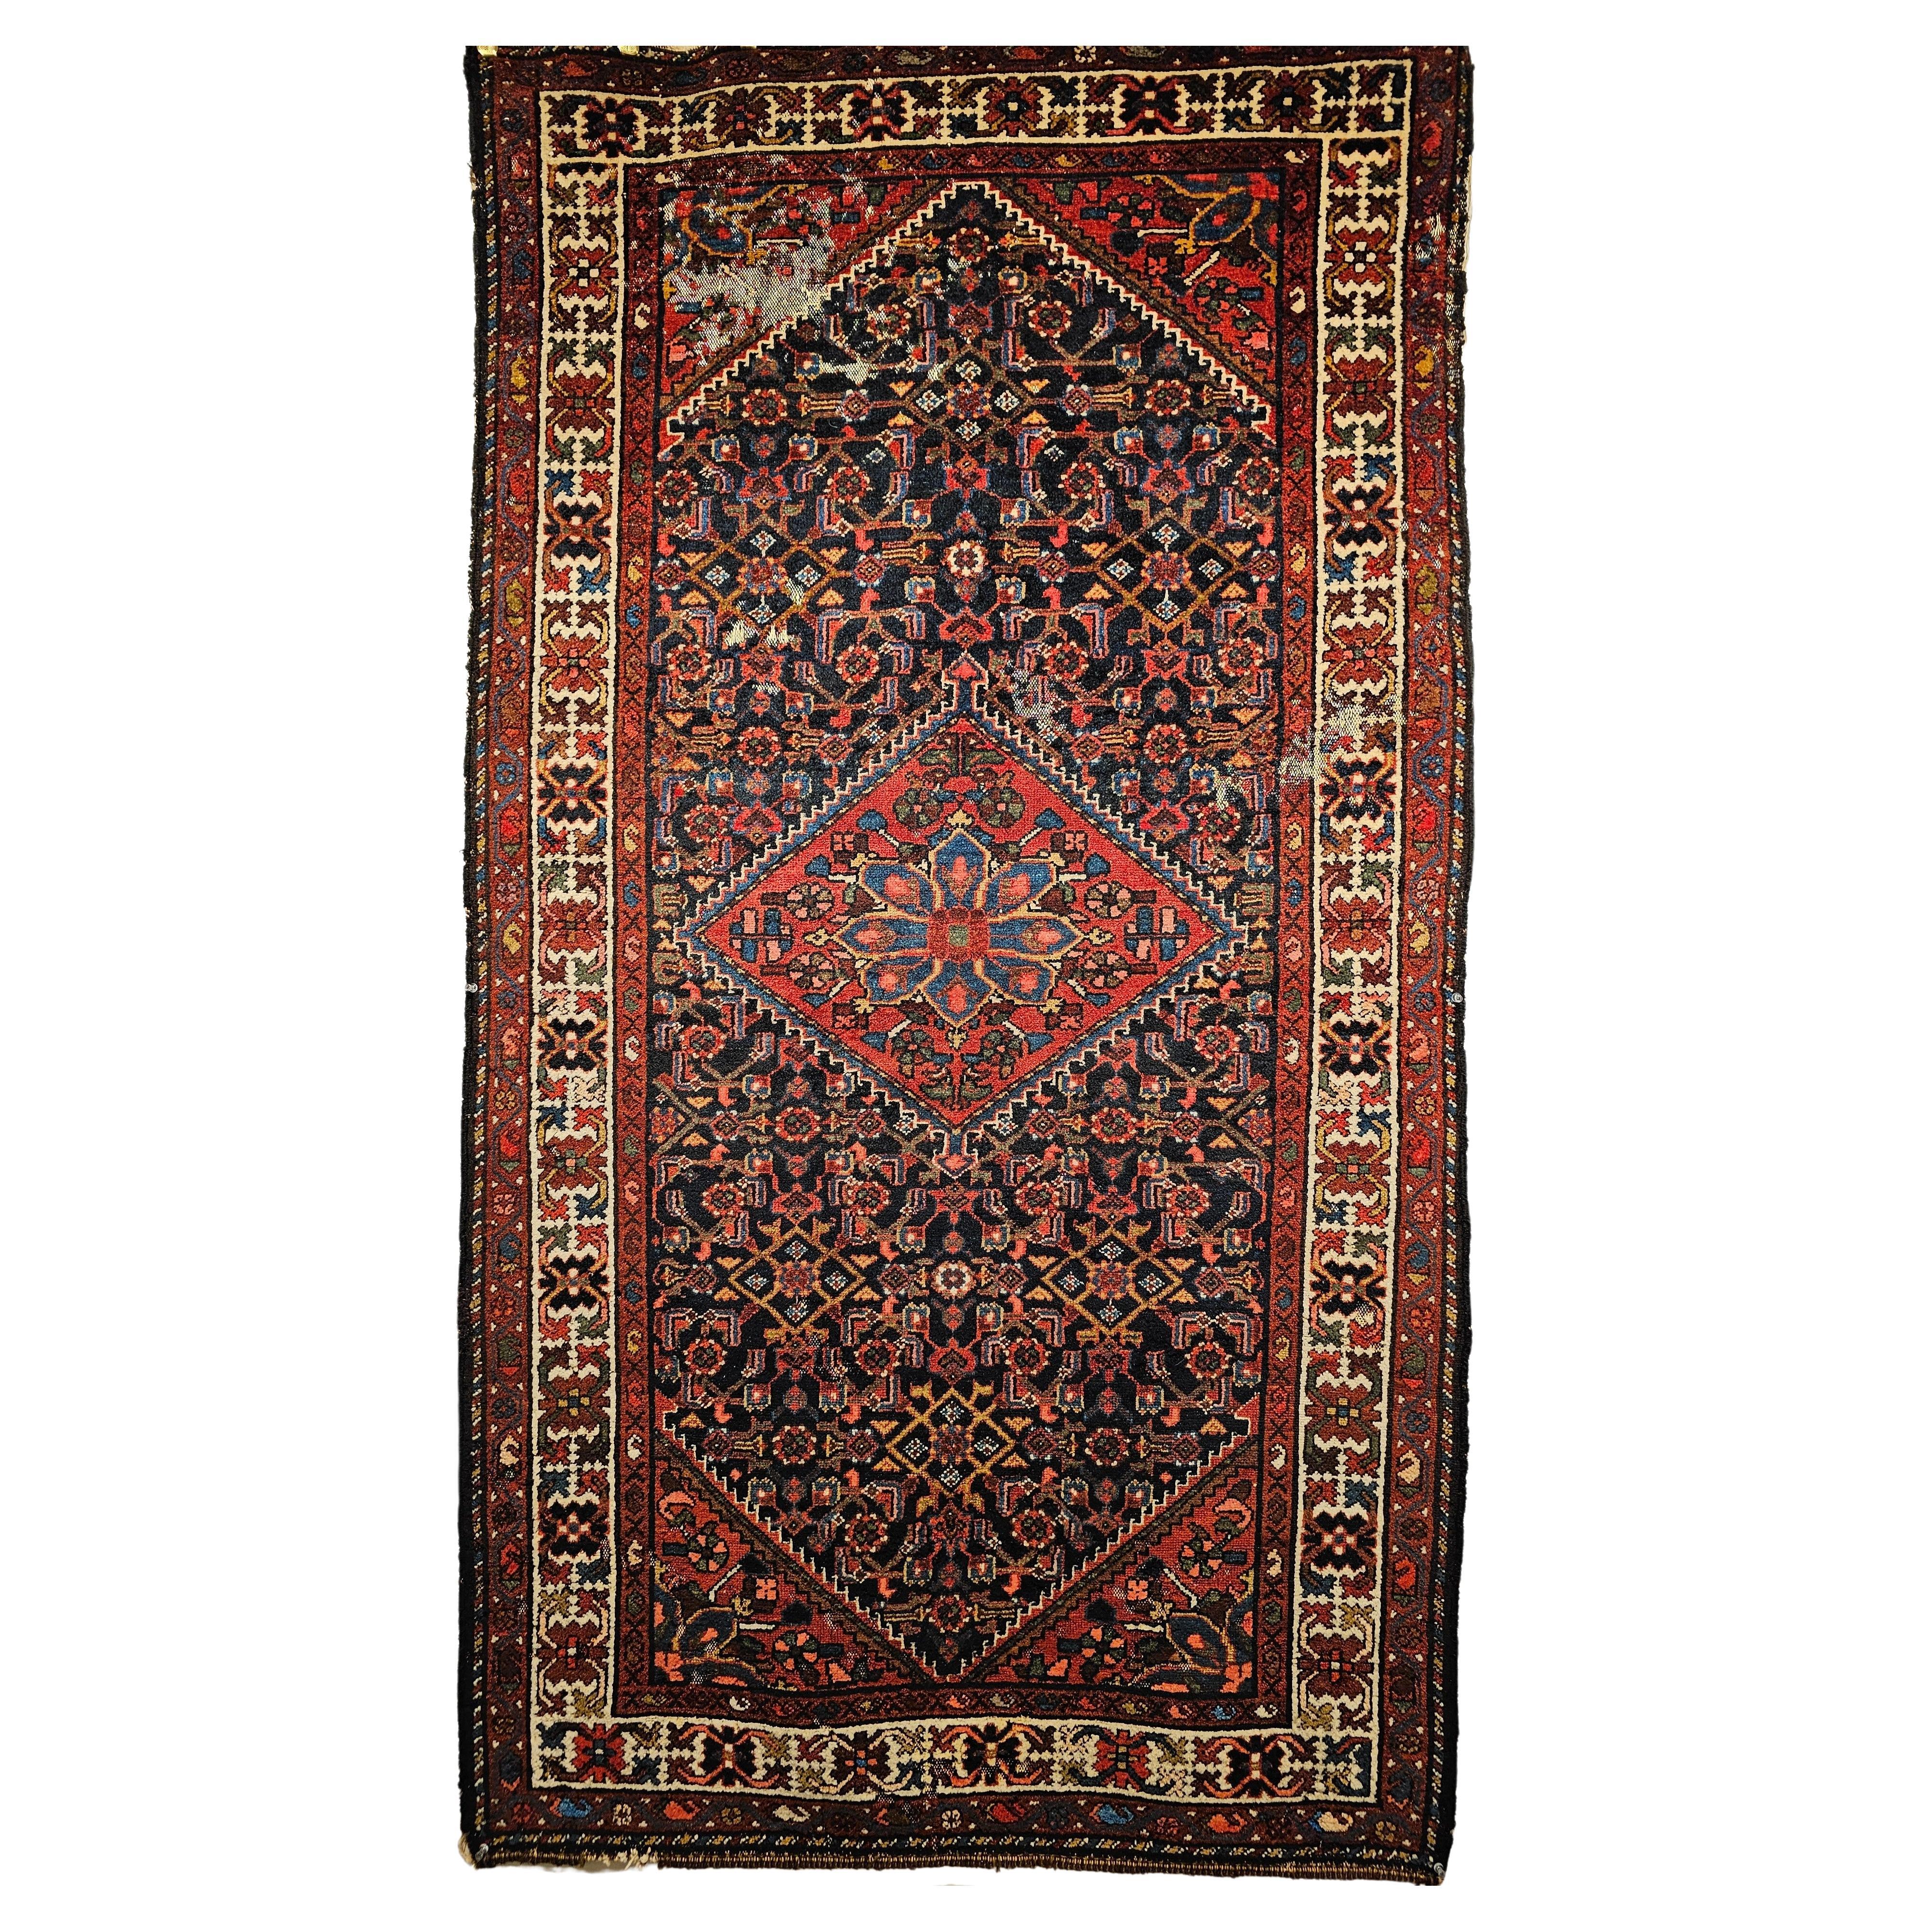 Vintage Persian Malayer Area Rug in Allover Pattern in Navy, Red, Blue, Brown